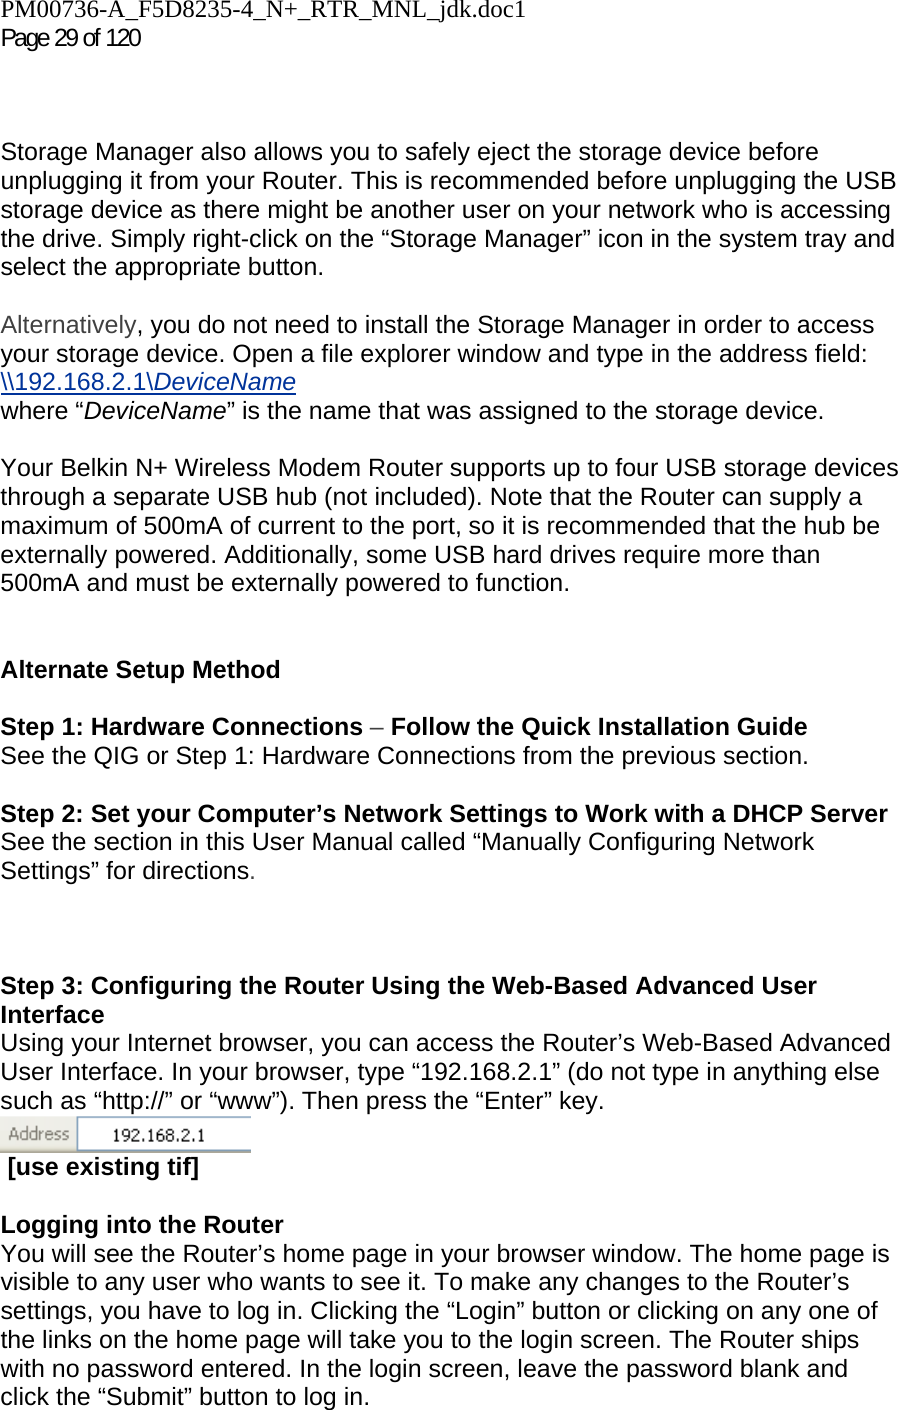 PM00736-A_F5D8235-4_N+_RTR_MNL_jdk.doc1  Page 29 of 120     Storage Manager also allows you to safely eject the storage device before unplugging it from your Router. This is recommended before unplugging the USB storage device as there might be another user on your network who is accessing the drive. Simply right-click on the “Storage Manager” icon in the system tray and select the appropriate button.  Alternatively, you do not need to install the Storage Manager in order to access your storage device. Open a file explorer window and type in the address field:  \\192.168.2.1\DeviceName  where “DeviceName” is the name that was assigned to the storage device.    Your Belkin N+ Wireless Modem Router supports up to four USB storage devices through a separate USB hub (not included). Note that the Router can supply a maximum of 500mA of current to the port, so it is recommended that the hub be externally powered. Additionally, some USB hard drives require more than 500mA and must be externally powered to function.   Alternate Setup Method  Step 1: Hardware Connections – Follow the Quick Installation Guide See the QIG or Step 1: Hardware Connections from the previous section.  Step 2: Set your Computer’s Network Settings to Work with a DHCP Server See the section in this User Manual called “Manually Configuring Network Settings” for directions.    Step 3: Configuring the Router Using the Web-Based Advanced User Interface Using your Internet browser, you can access the Router’s Web-Based Advanced User Interface. In your browser, type “192.168.2.1” (do not type in anything else such as “http://” or “www”). Then press the “Enter” key.   [use existing tif]  Logging into the Router You will see the Router’s home page in your browser window. The home page is visible to any user who wants to see it. To make any changes to the Router’s settings, you have to log in. Clicking the “Login” button or clicking on any one of the links on the home page will take you to the login screen. The Router ships with no password entered. In the login screen, leave the password blank and click the “Submit” button to log in. 